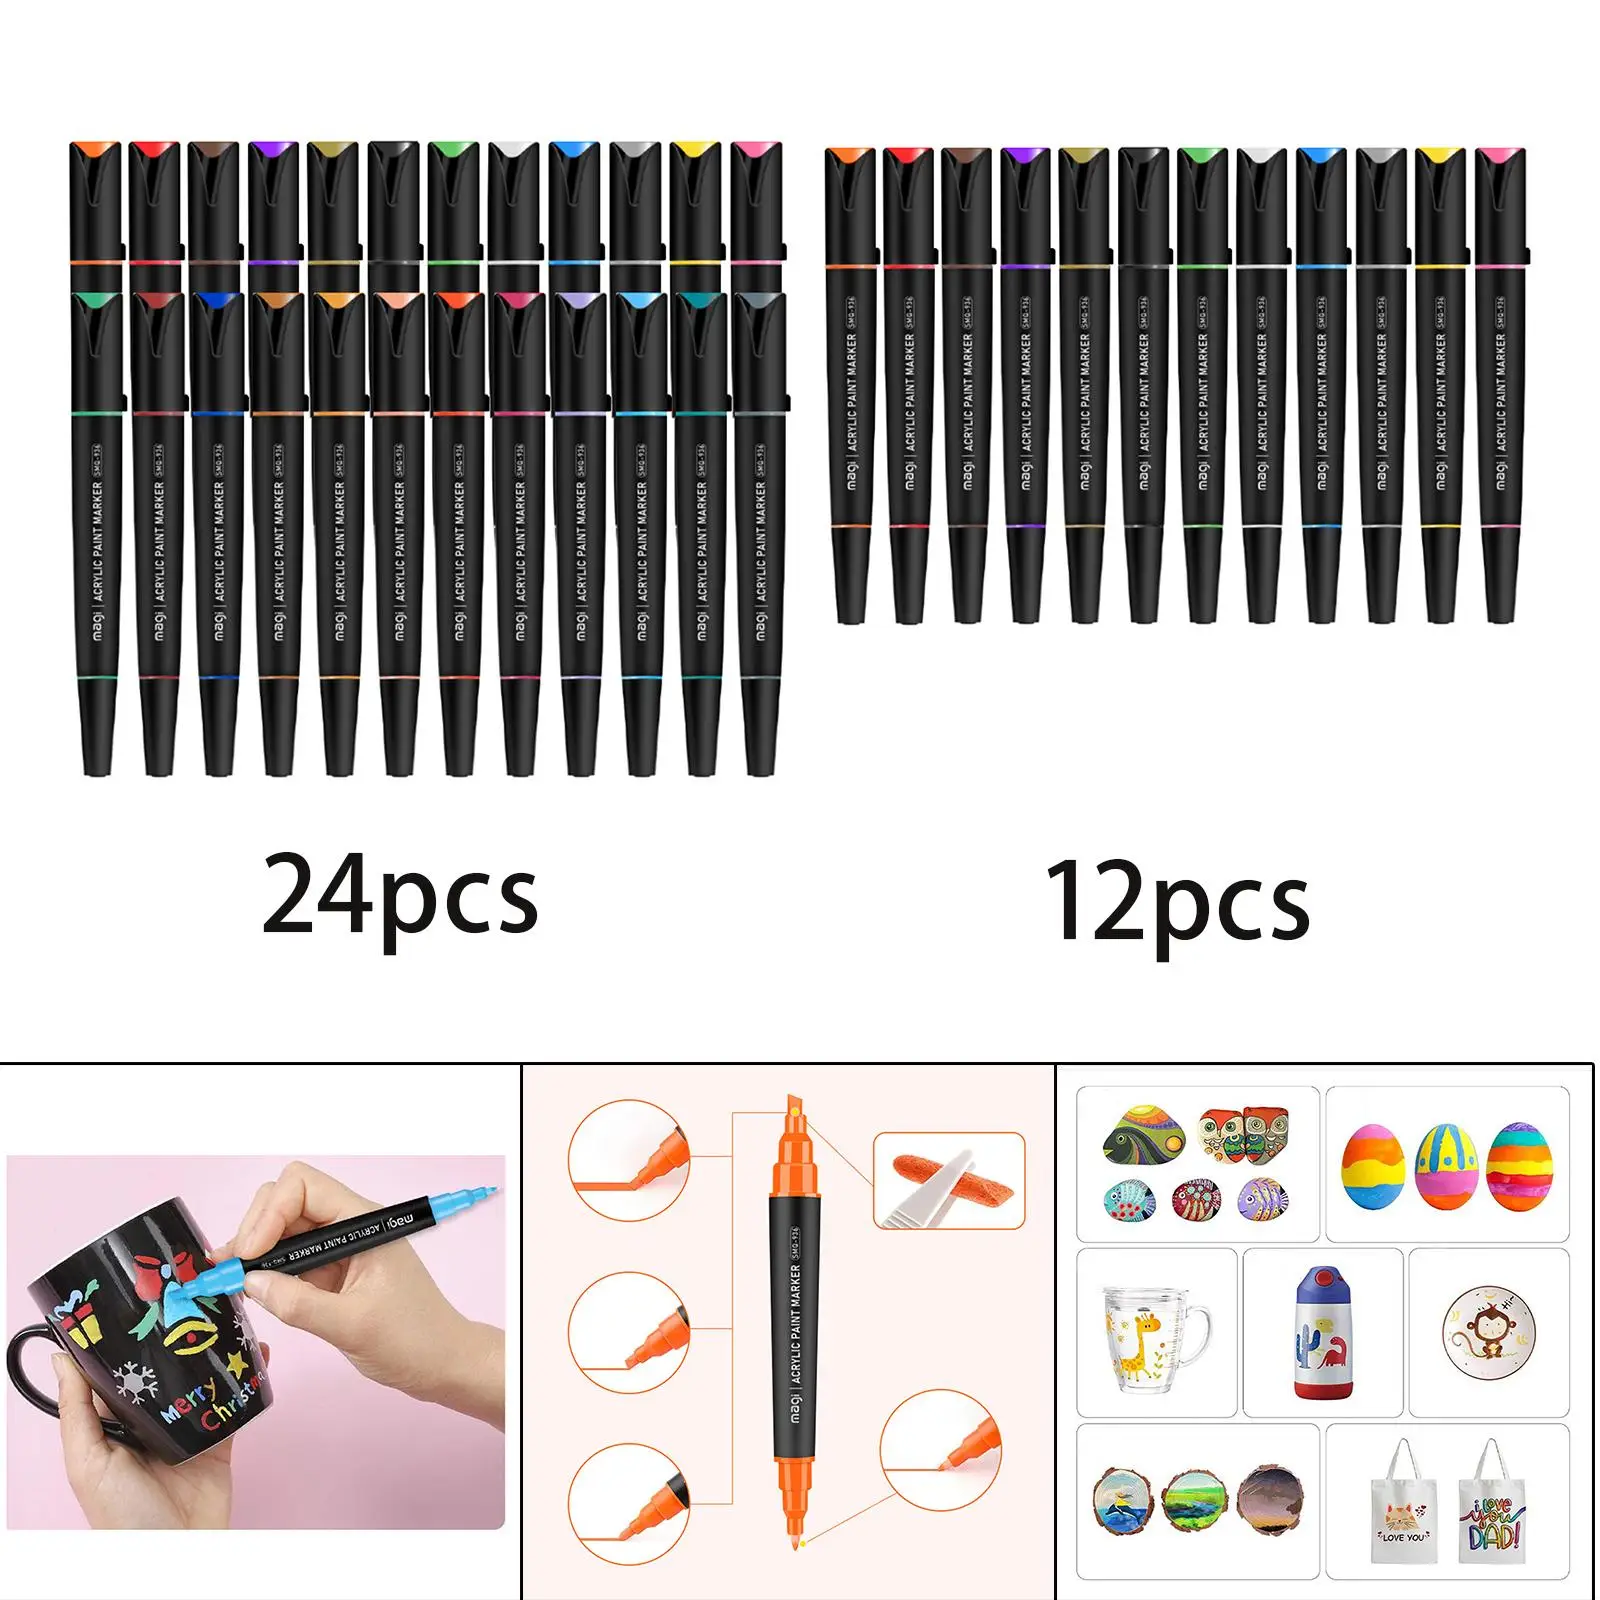 DIY Acrylic Paint Marker Pen Kit, Permanent Double Ended Waterproof Marker Drying Plastic Art Crafts